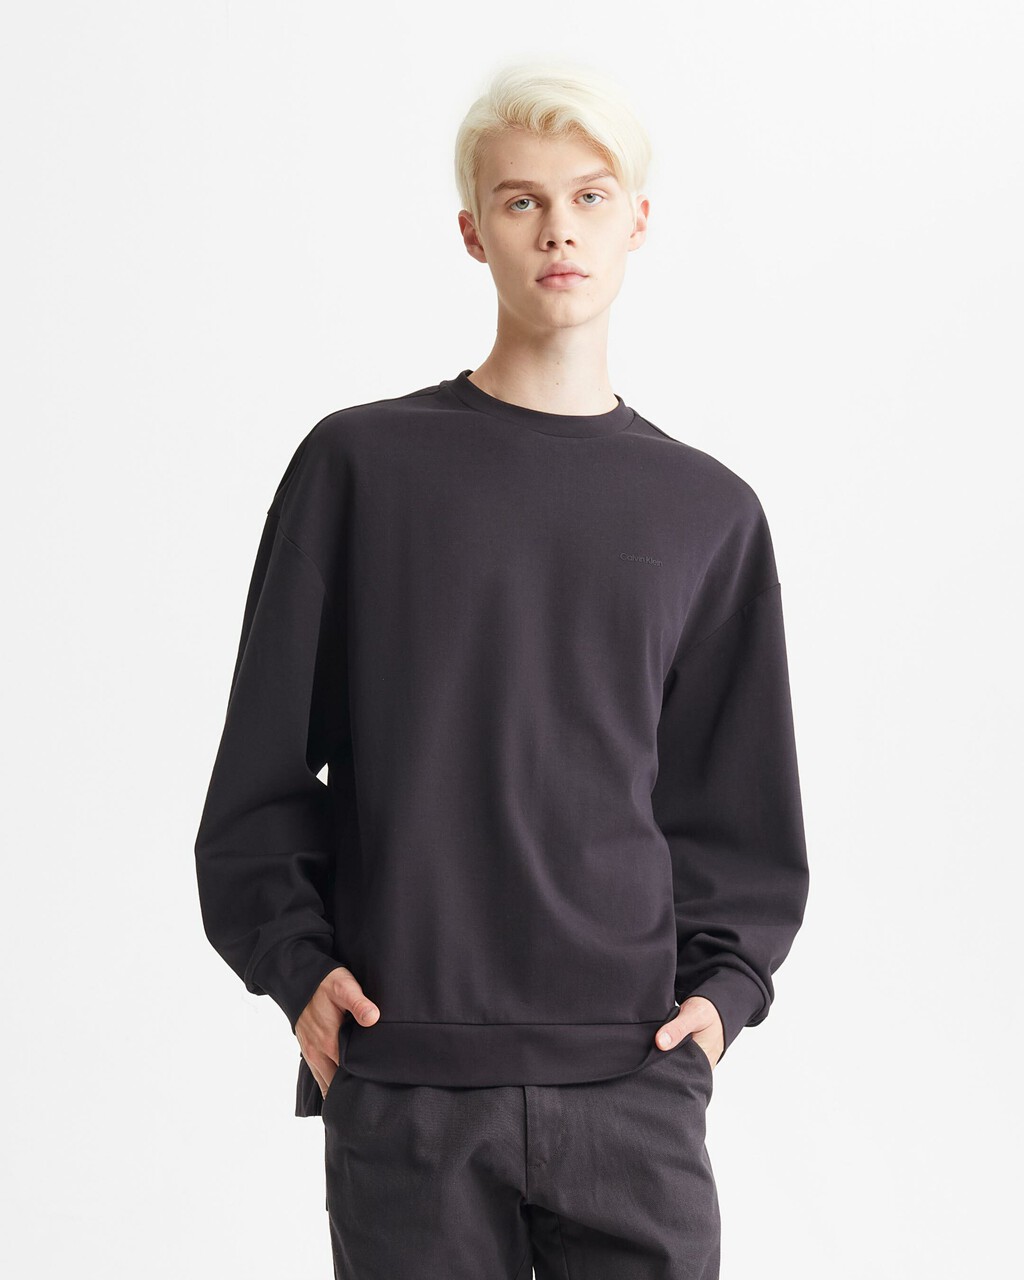 CK KHAKIS ARTICULATED SPACER RELAXED SWEATSHIRT, Black Beauty, hi-res